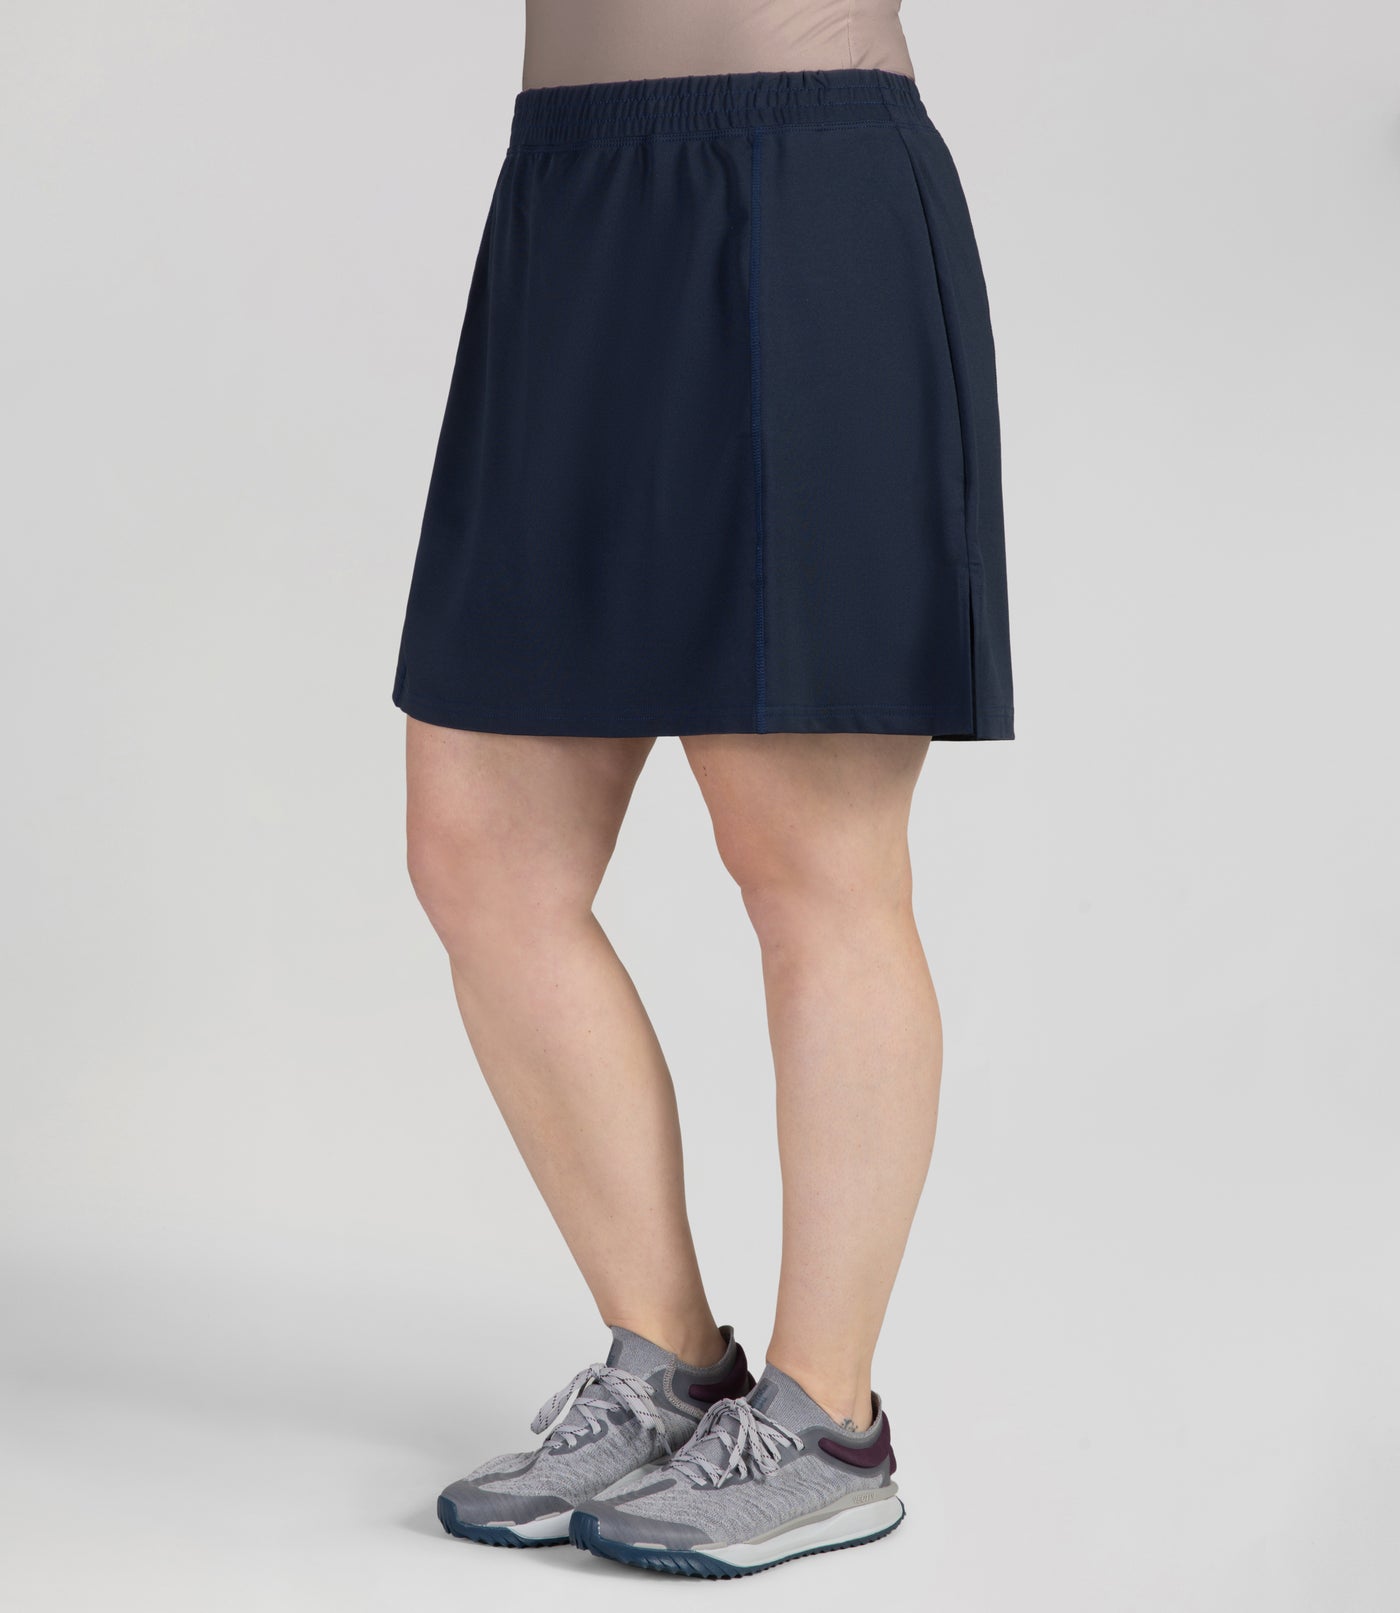 Bottom half of plus sized woman, Front side view, wearing JunoActives Quikwik lite skirted short in color navy. Skirt hem is a few inches above knee.